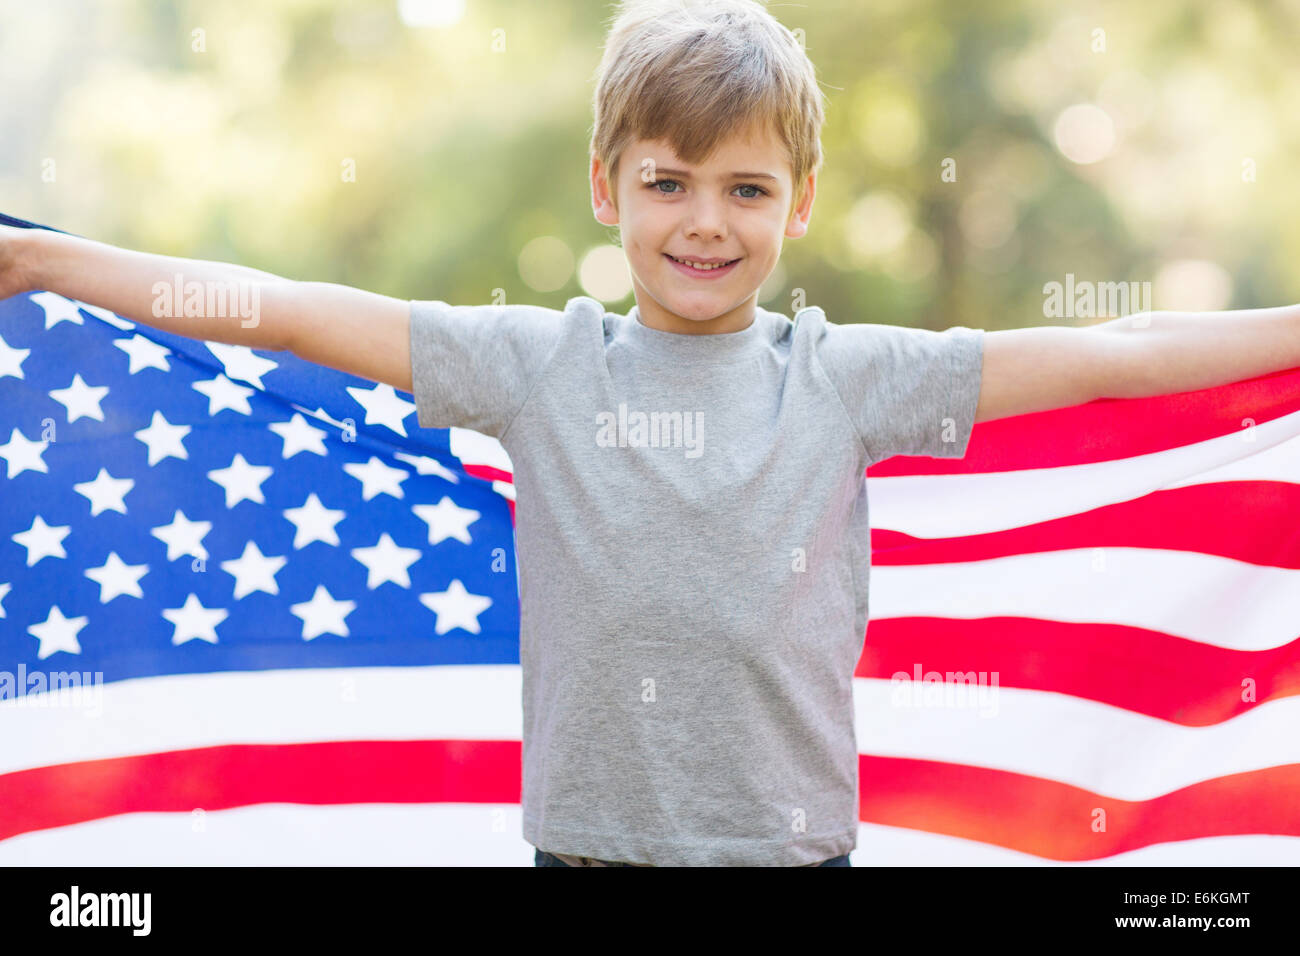 portrait of cute little boy holding American flag outdoors Stock Photo